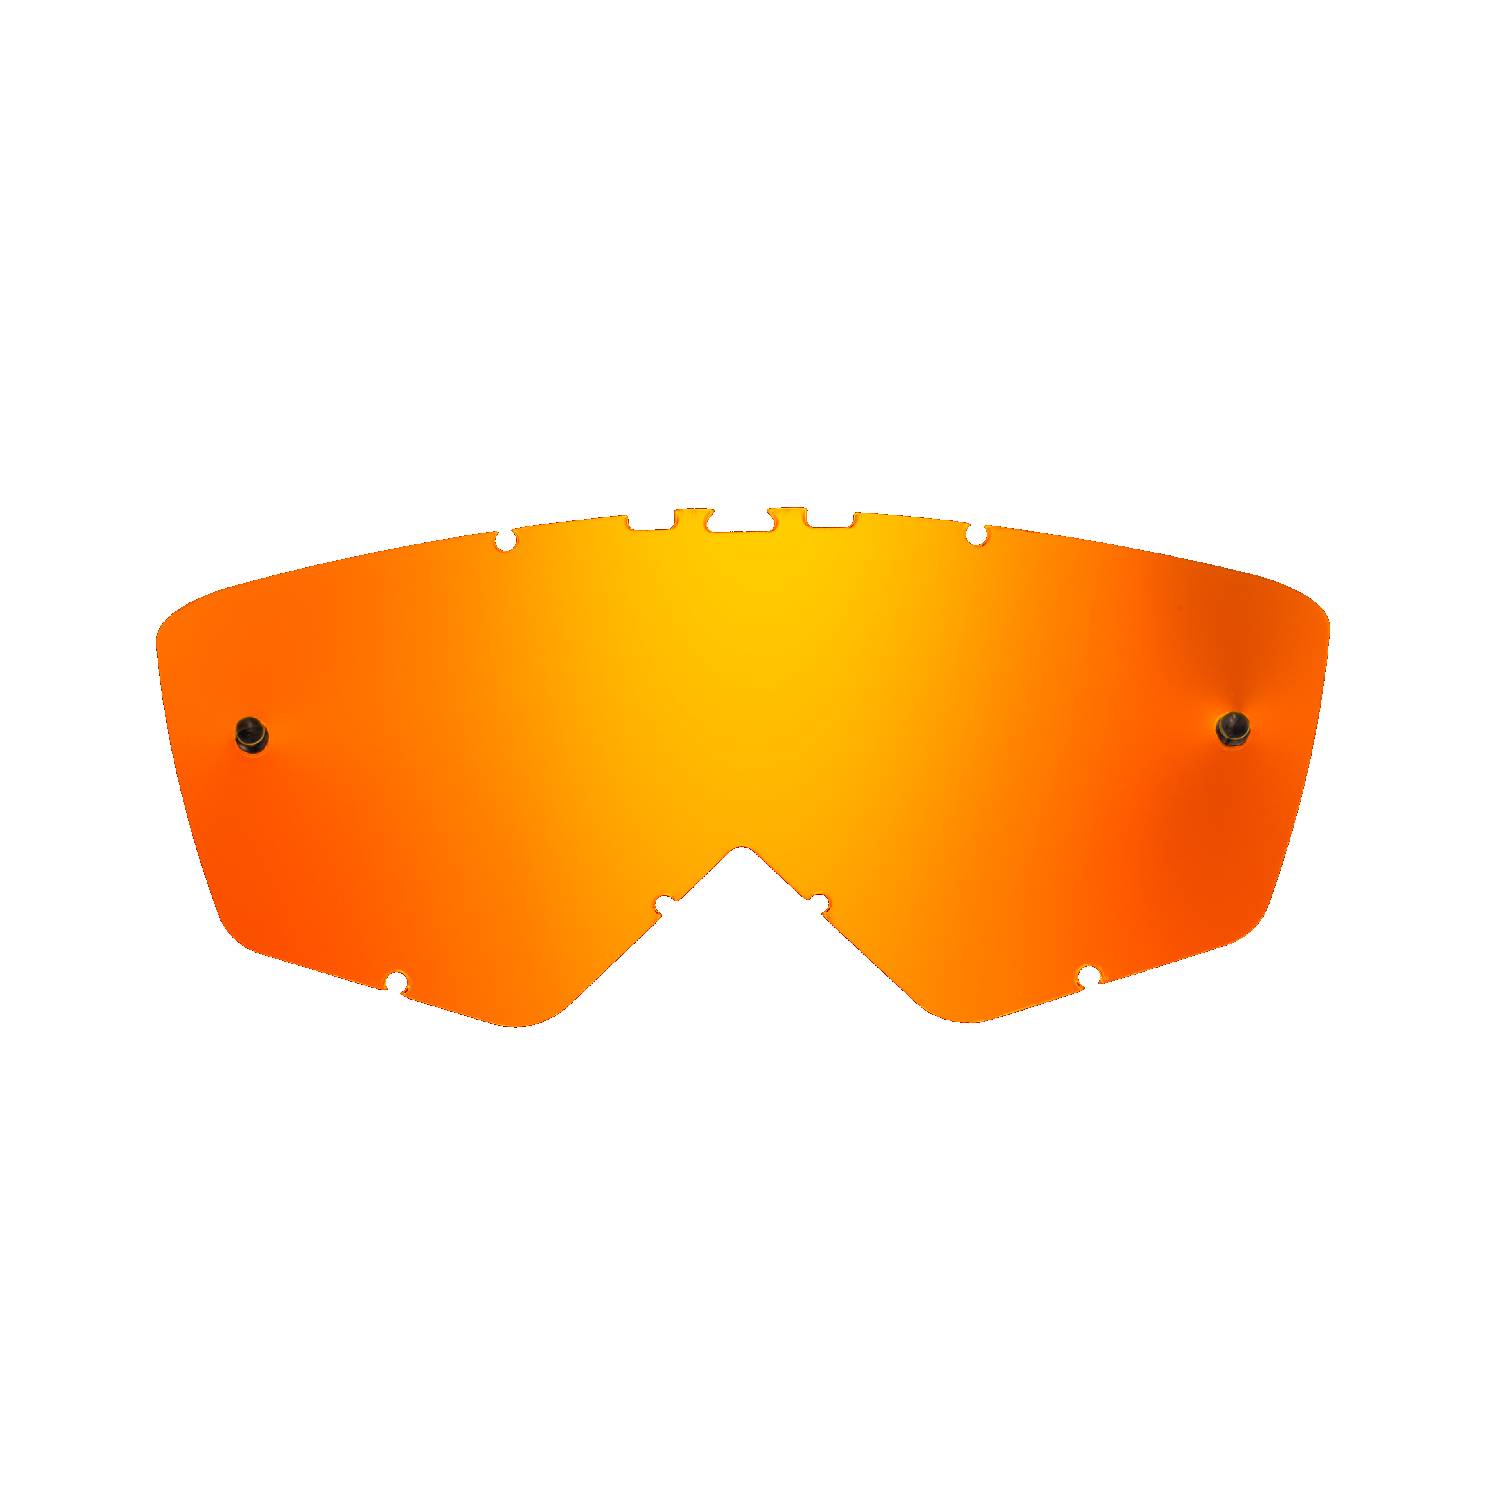 orange-toned mirrored replacement lenses for goggles compatible for Ariete Andrenaline RC07 / Ride And Roll goggle